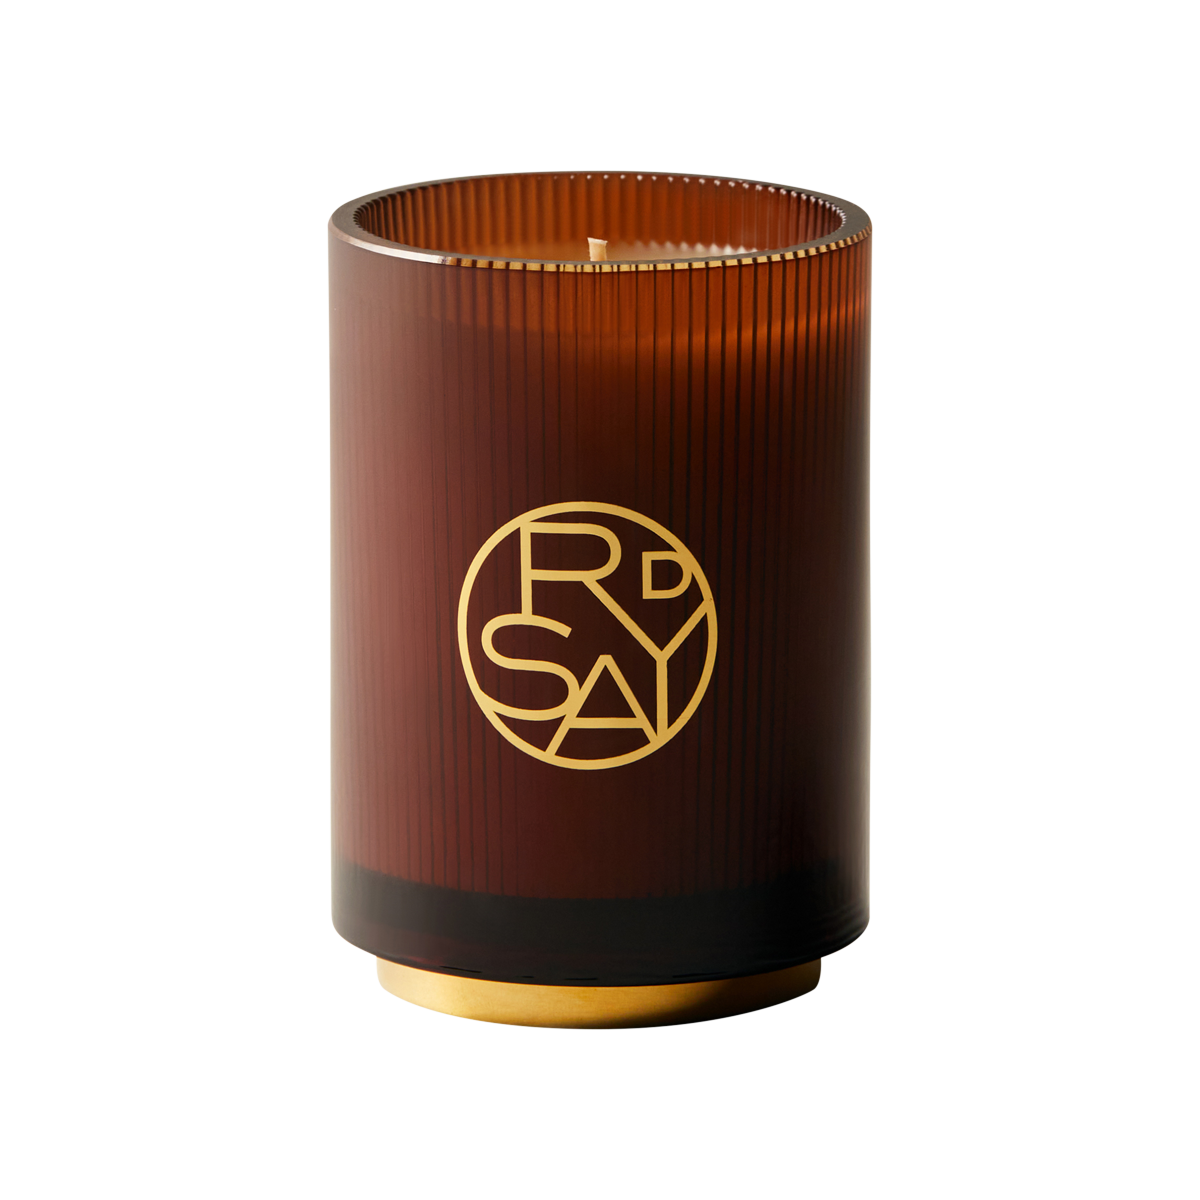 D'Orsay - Scented Candle 13:30 Au Même Endroit